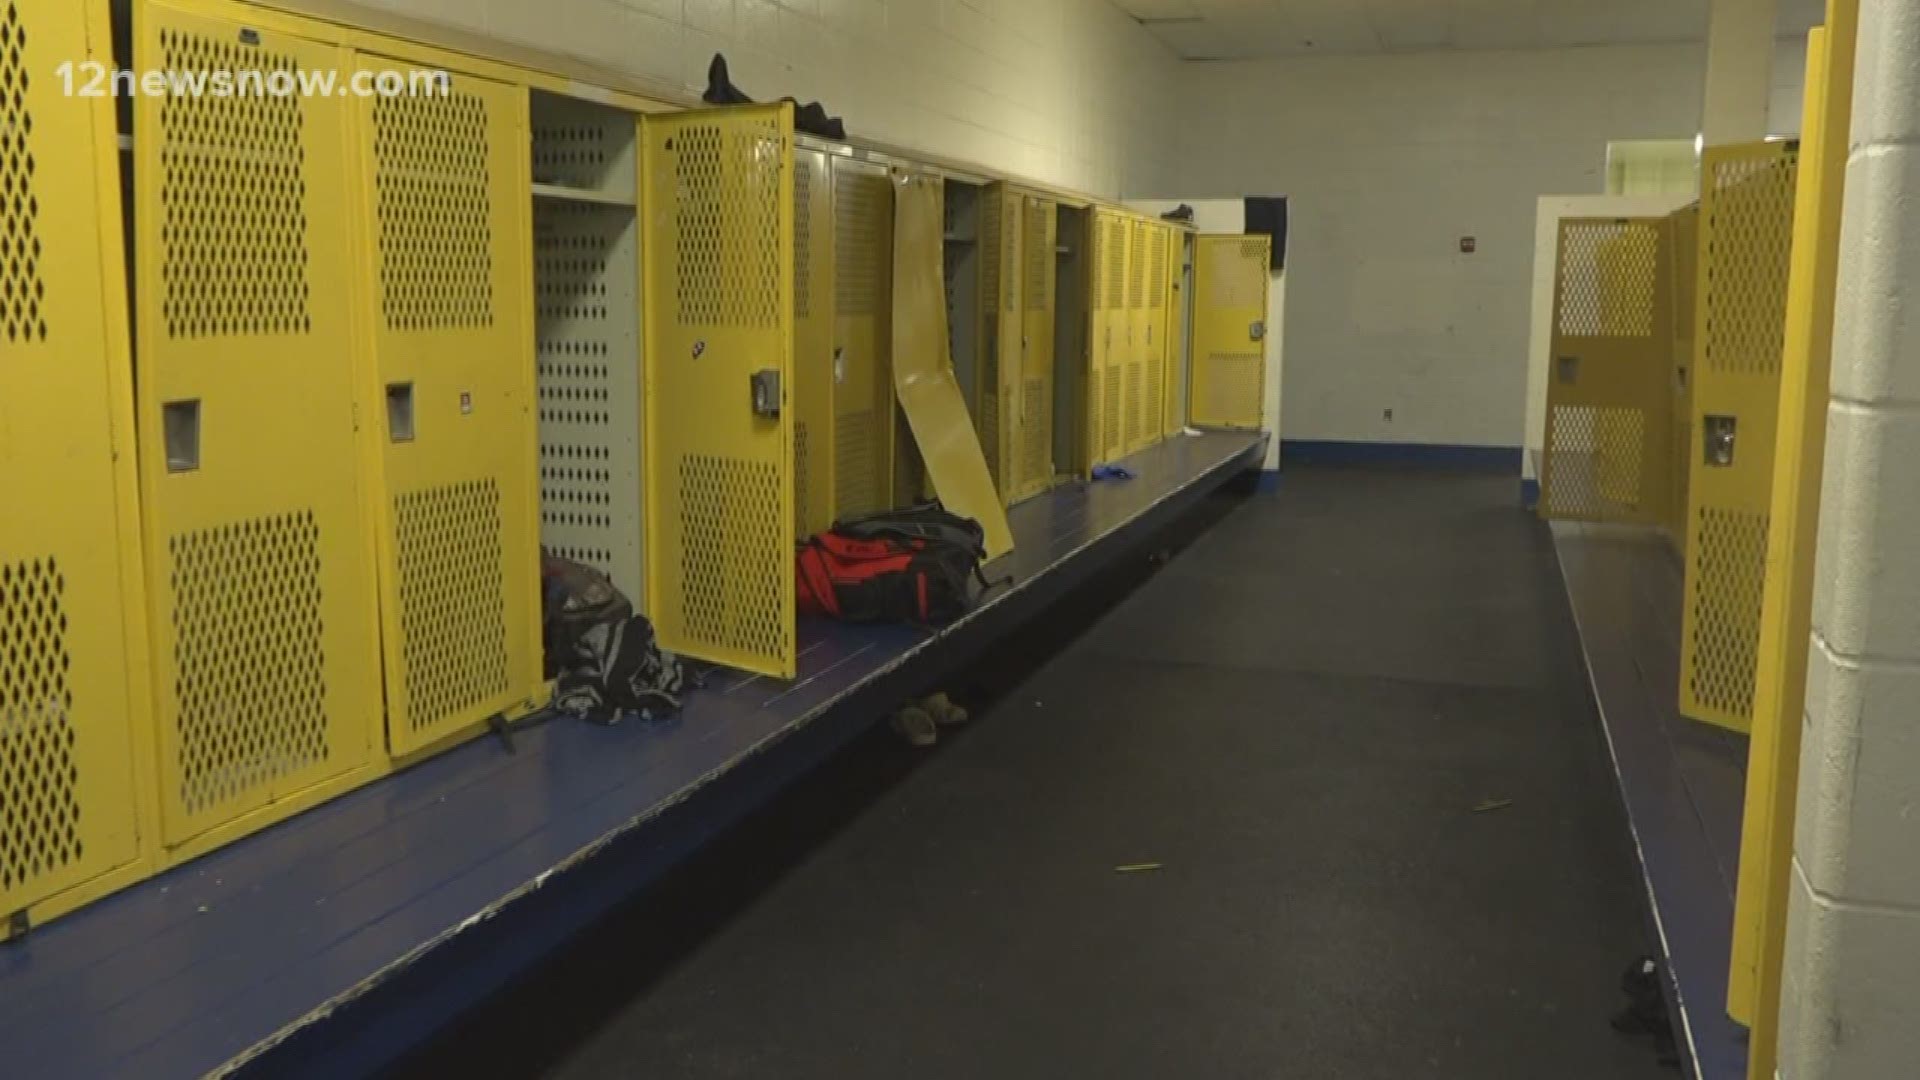 Students and coaches created a YouTube video to enter the contest, and explained that due to the flooding, about three students are sharing each locker.